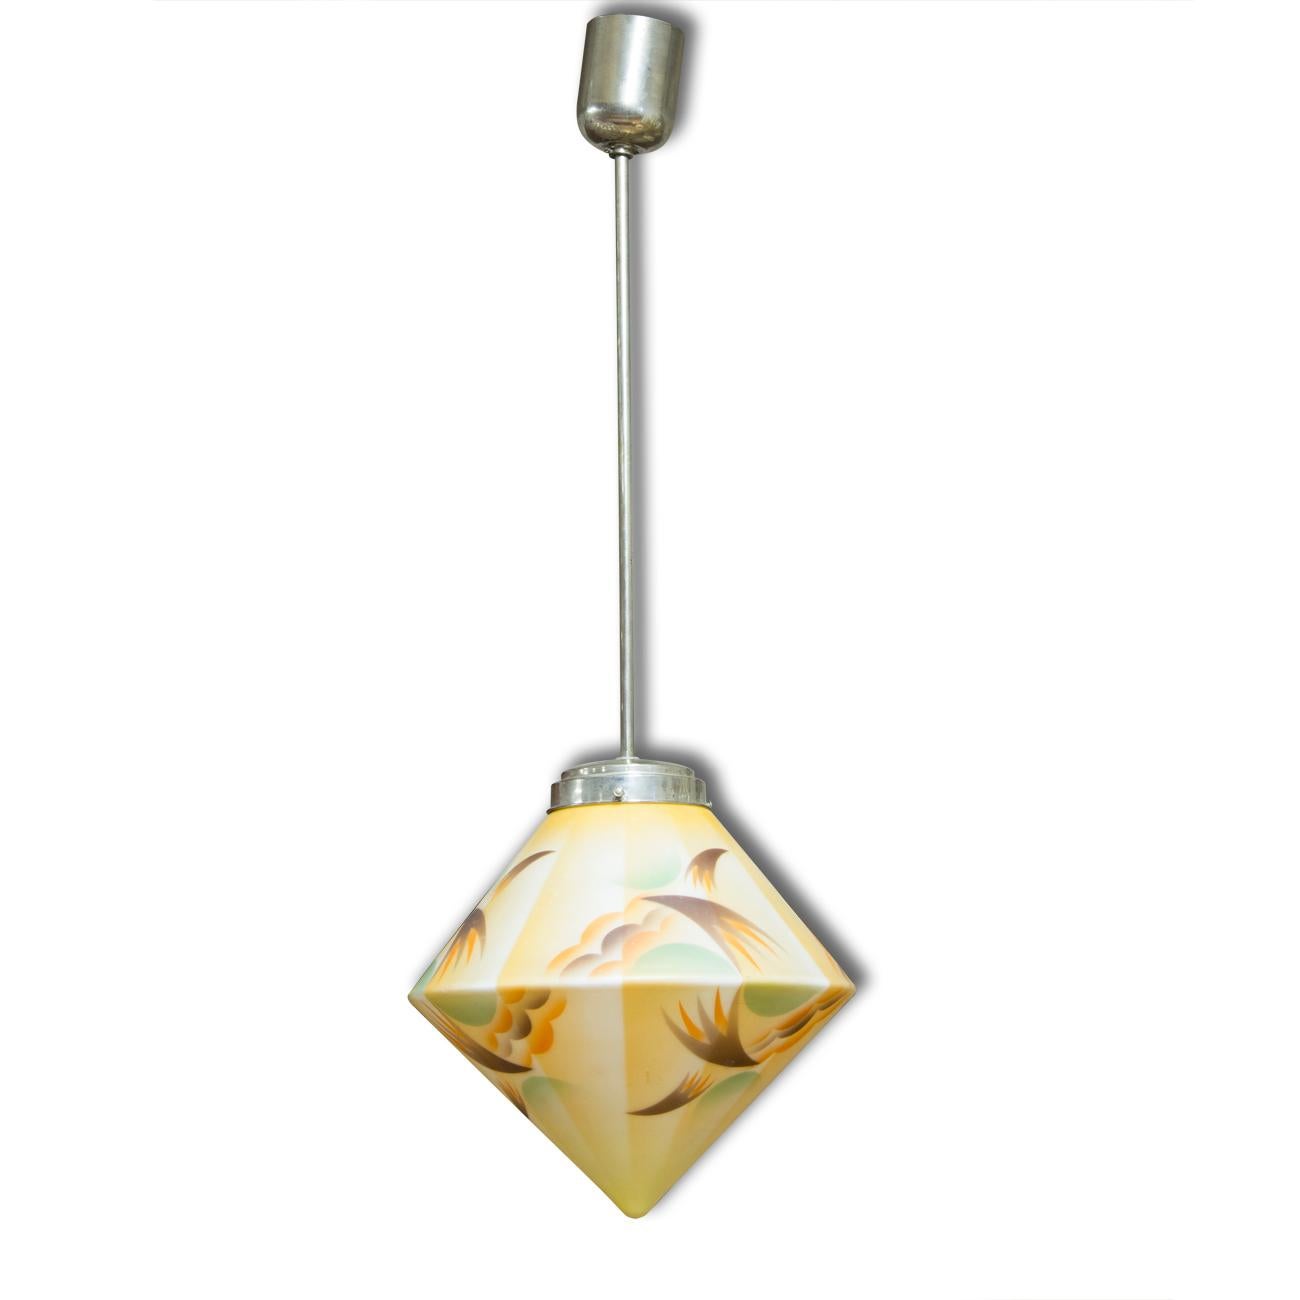 Bauhaus pendant lamp on a chromed steel frame and with an opaline glass triangular shade. It was made in 1930s in Central Europe. In excellent condition. Original wiring. Functionality has not been tested. If you are interested, we will provide a